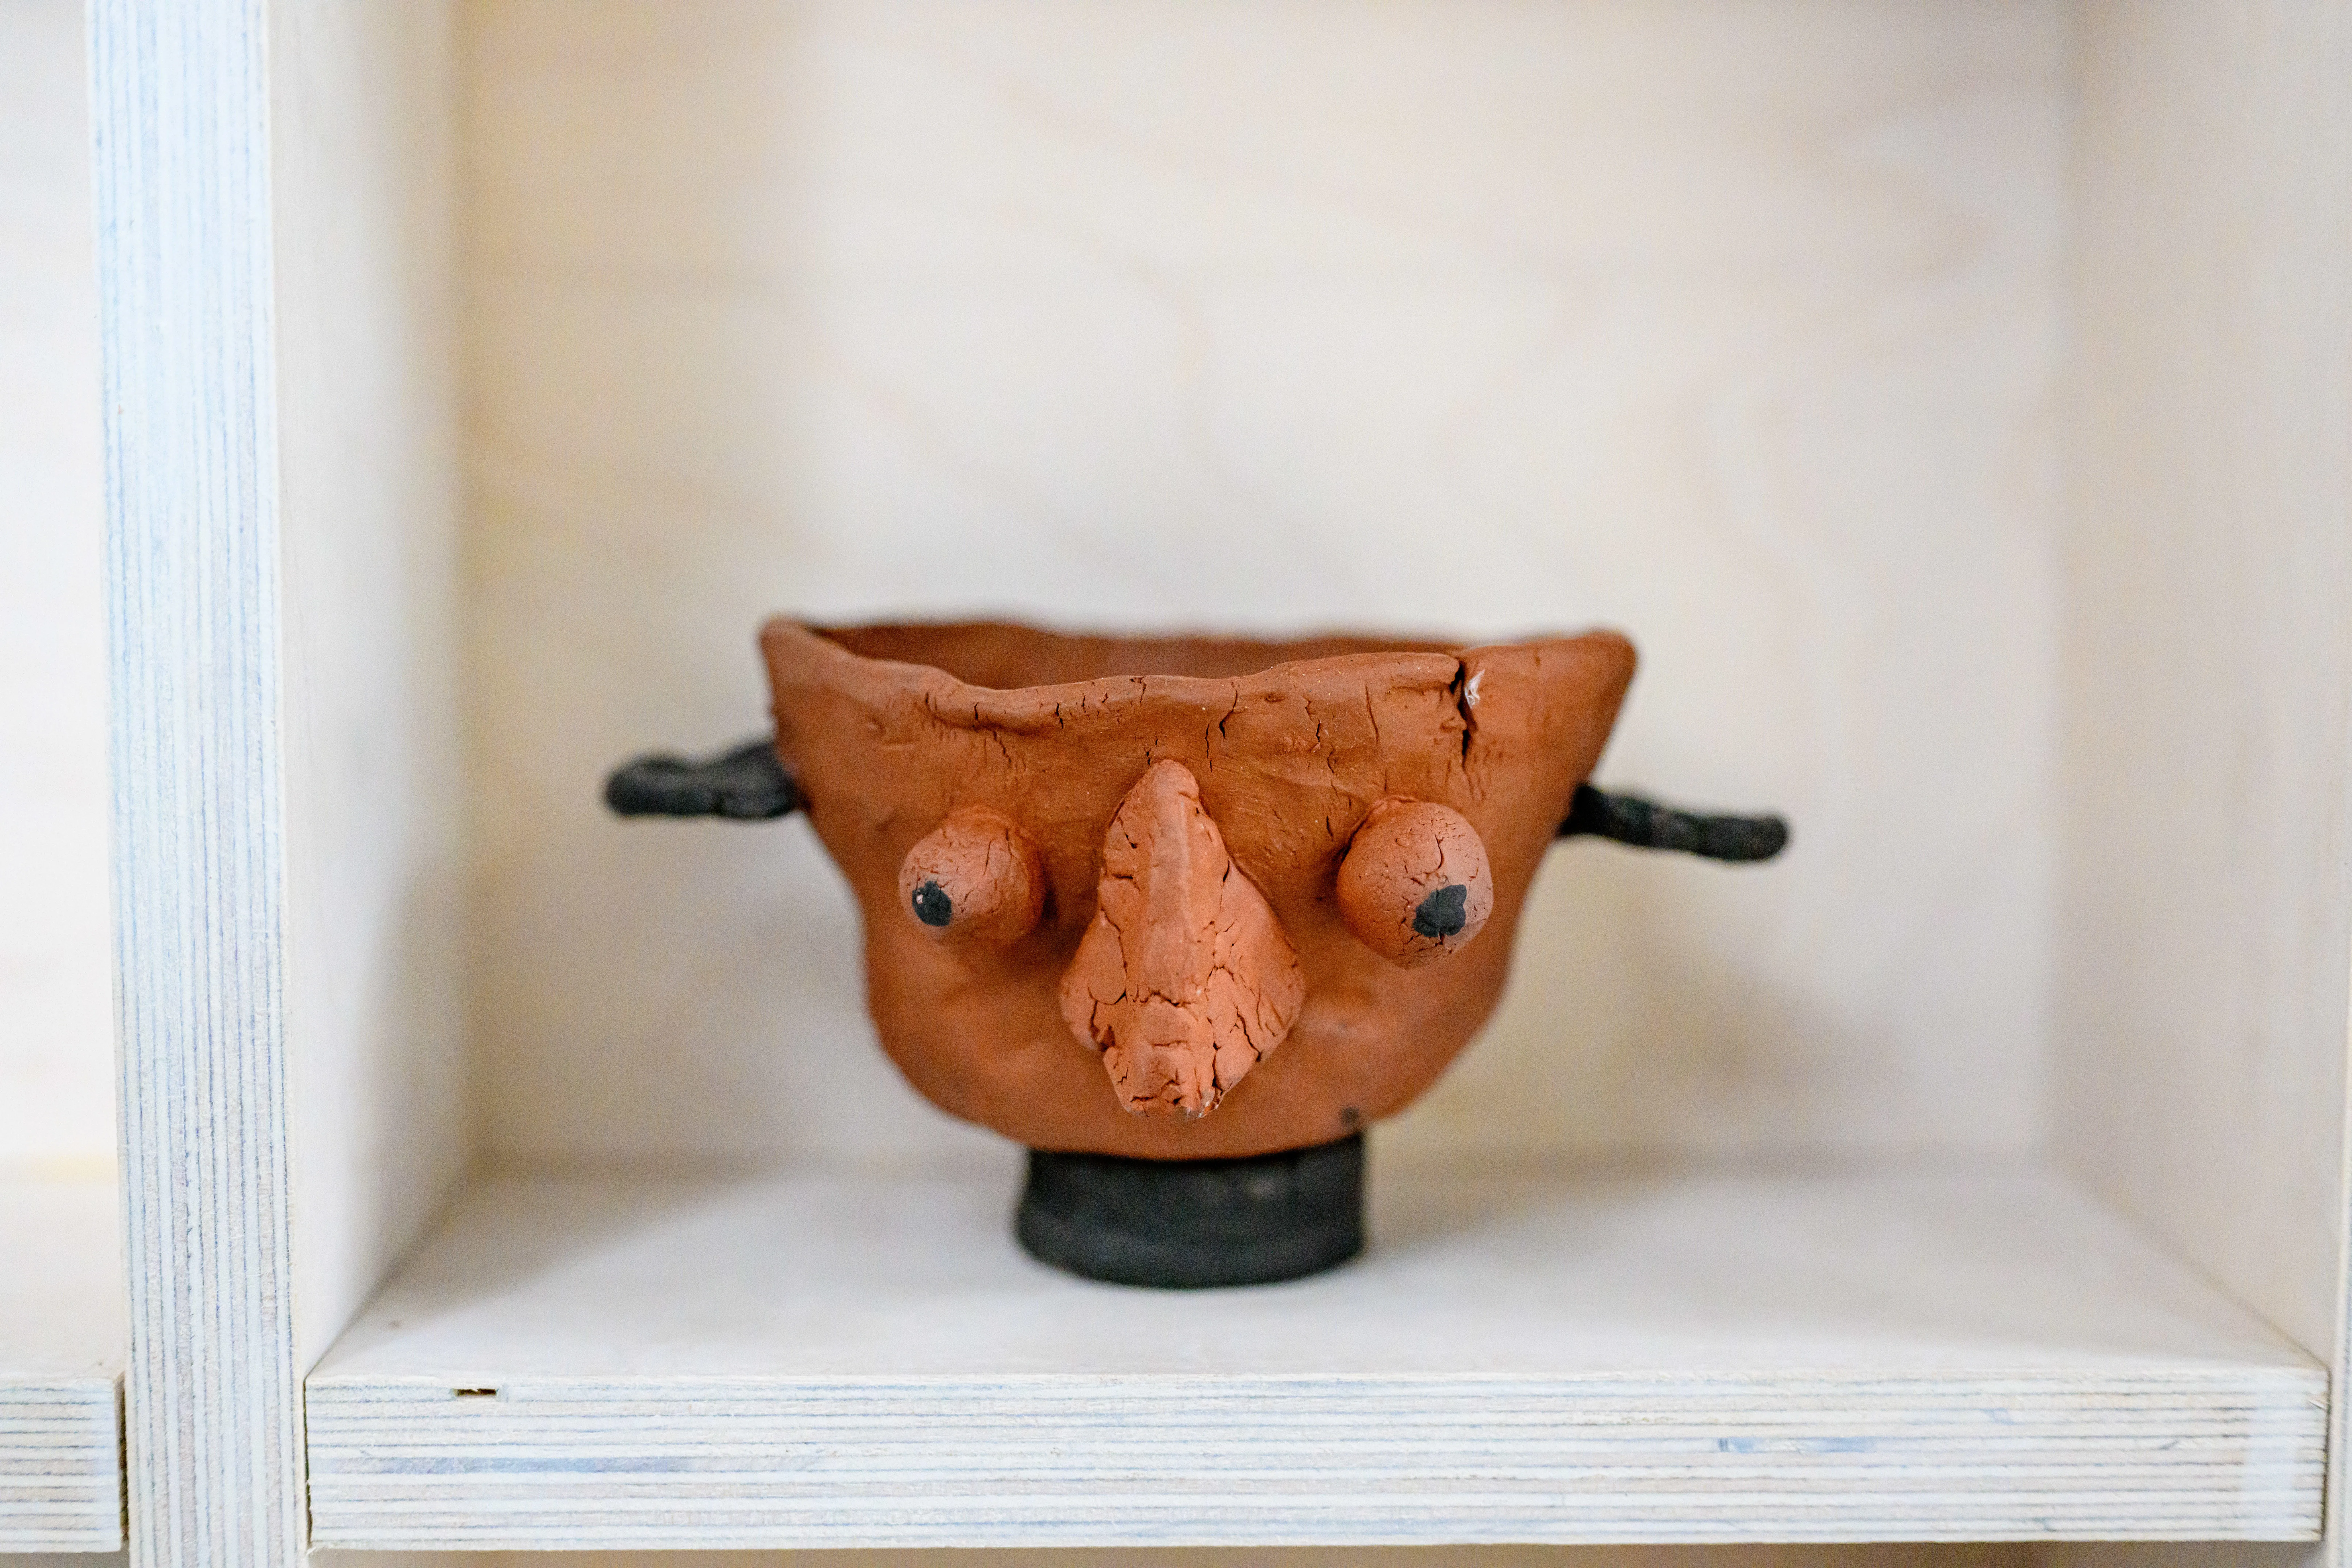 A clay pot made by students